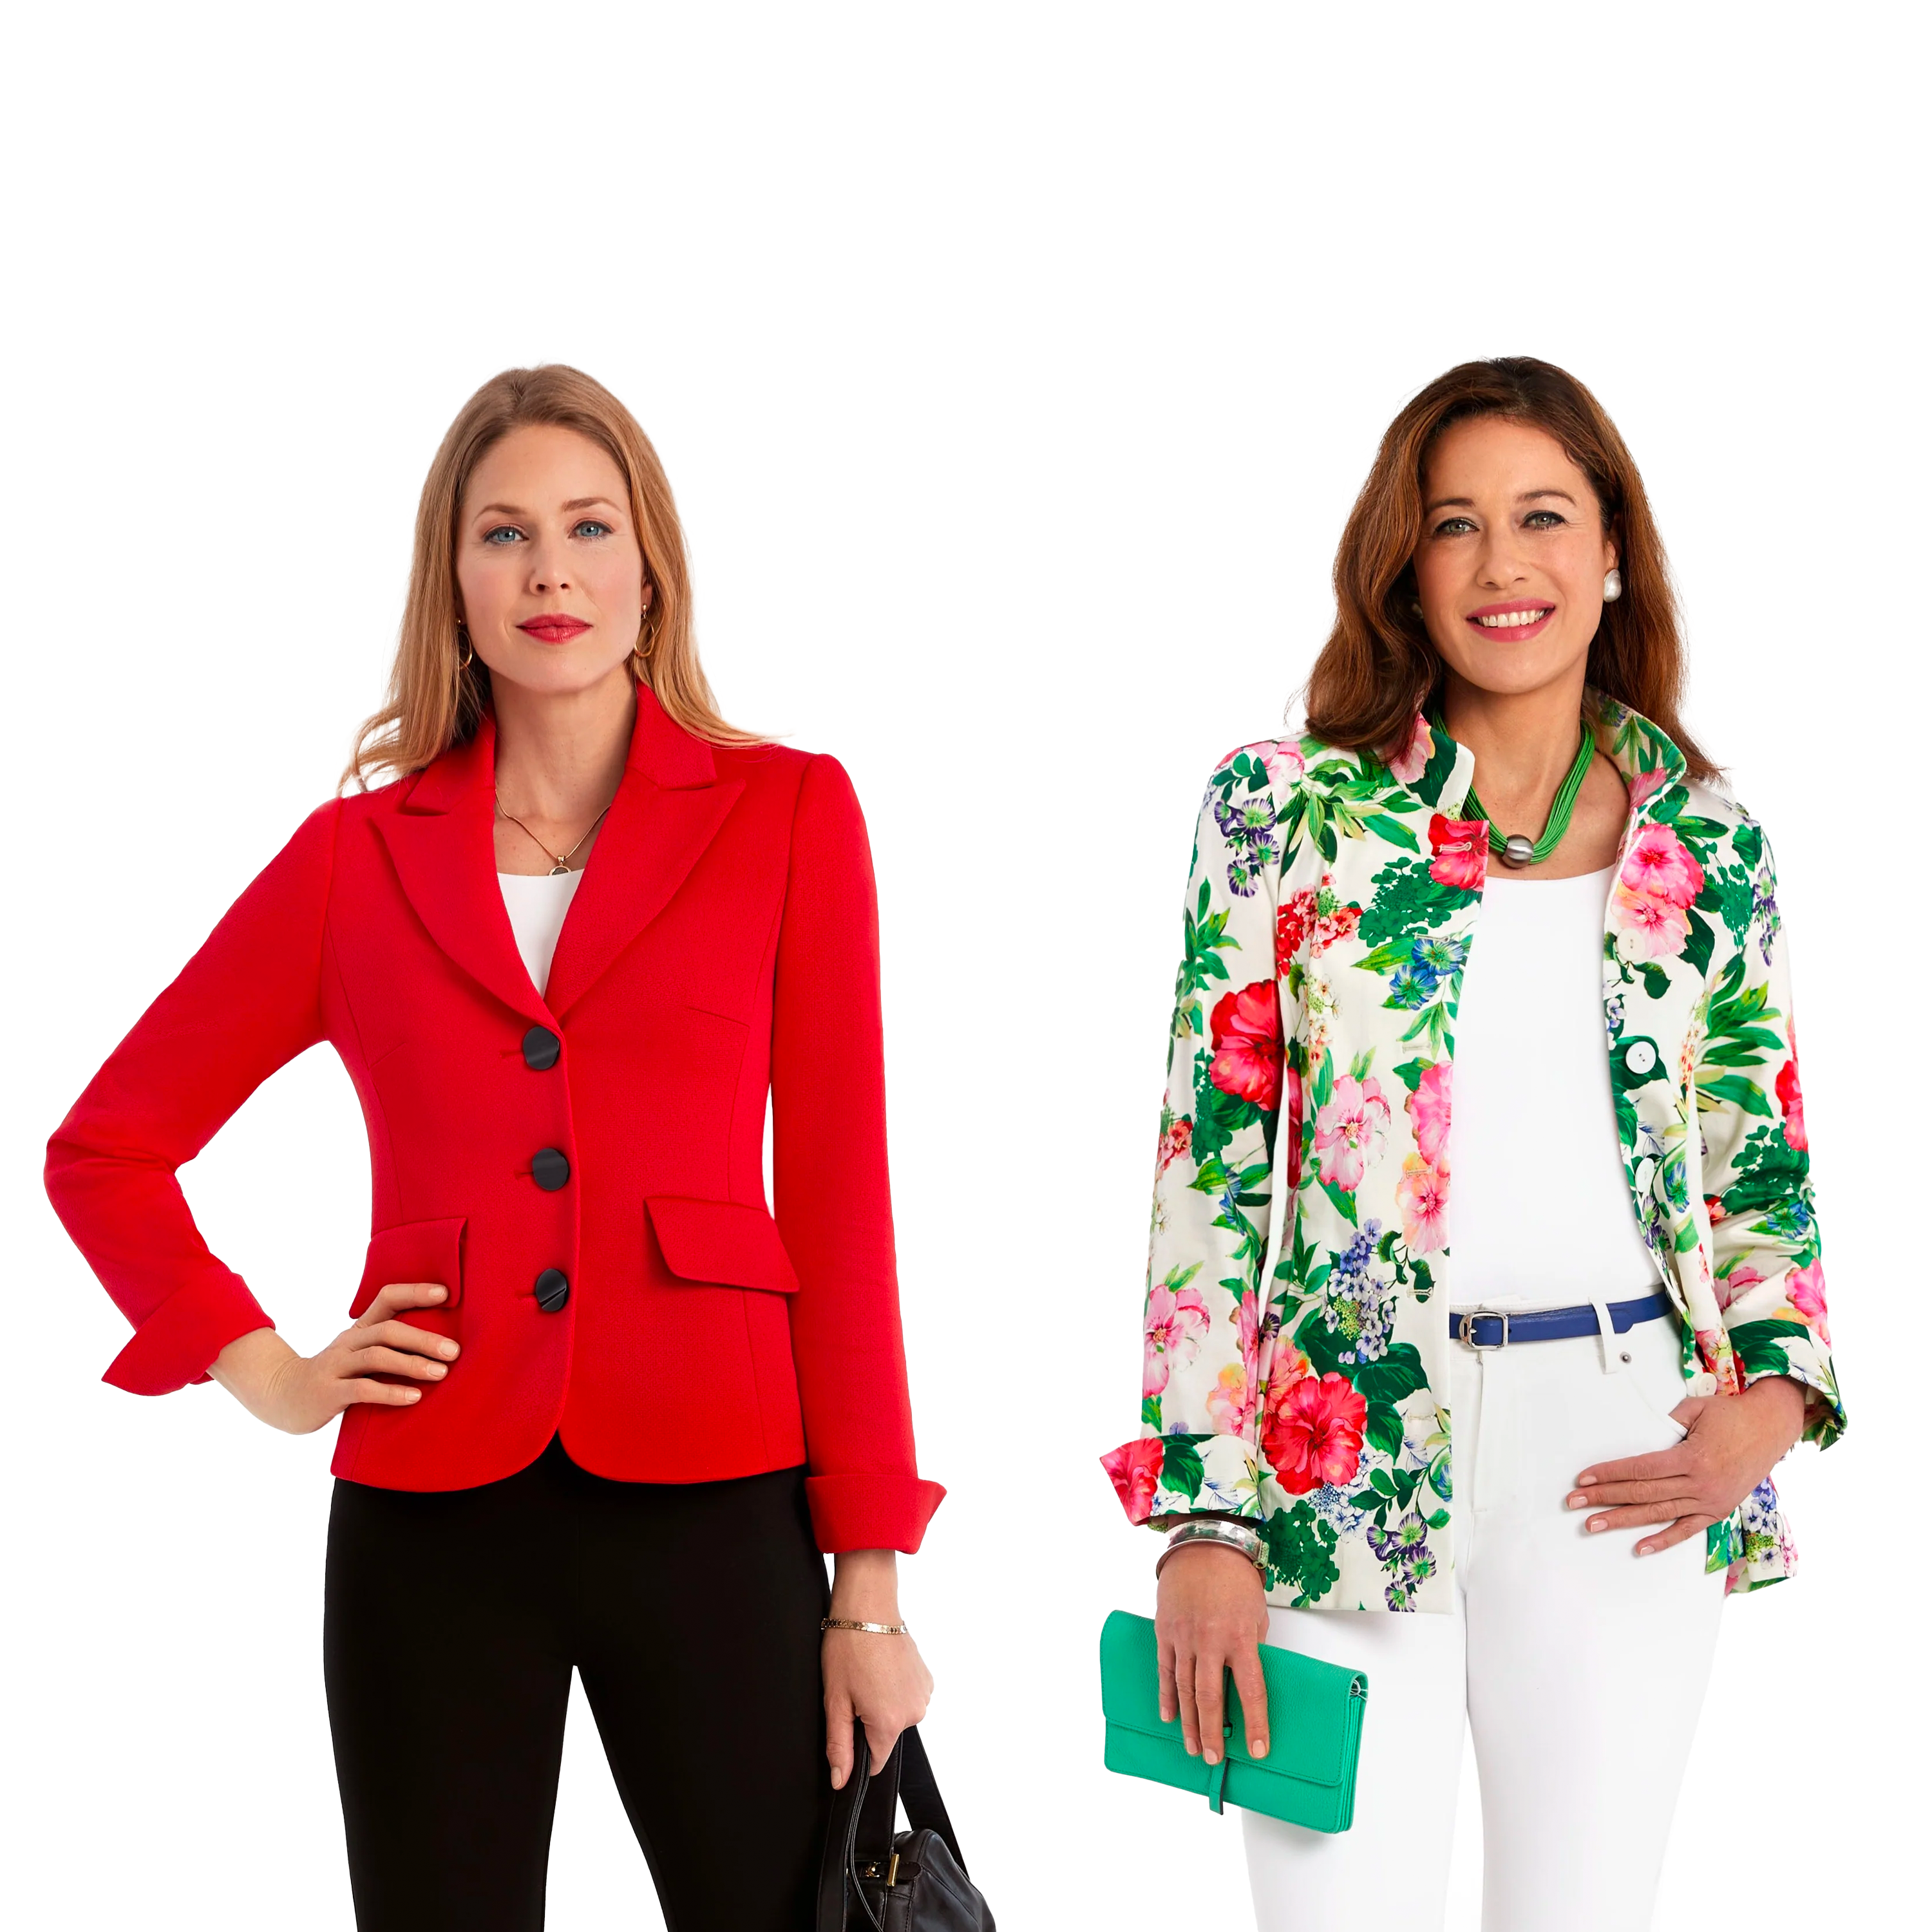 Two women posing in chic red and floral jackets